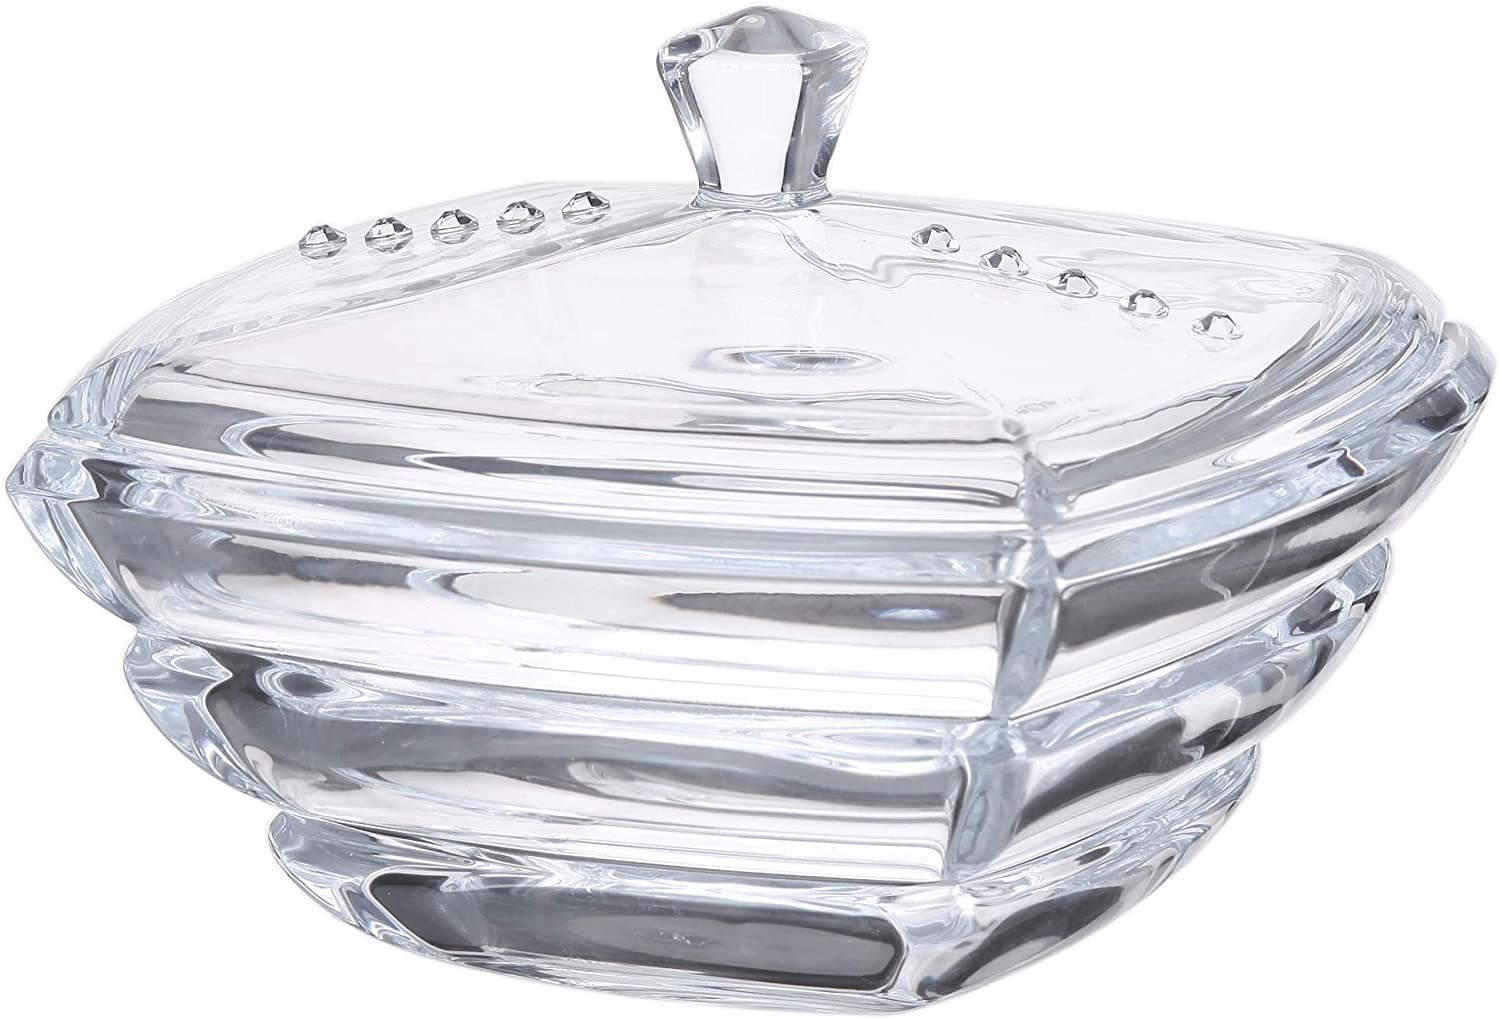 Crystalite Bohemia 7"x7" Crystal Bowl "Tower" with Lid with Swarovski Rhinestones, Candy/Fruit Bowl with Elegant Design - image 1 of 1